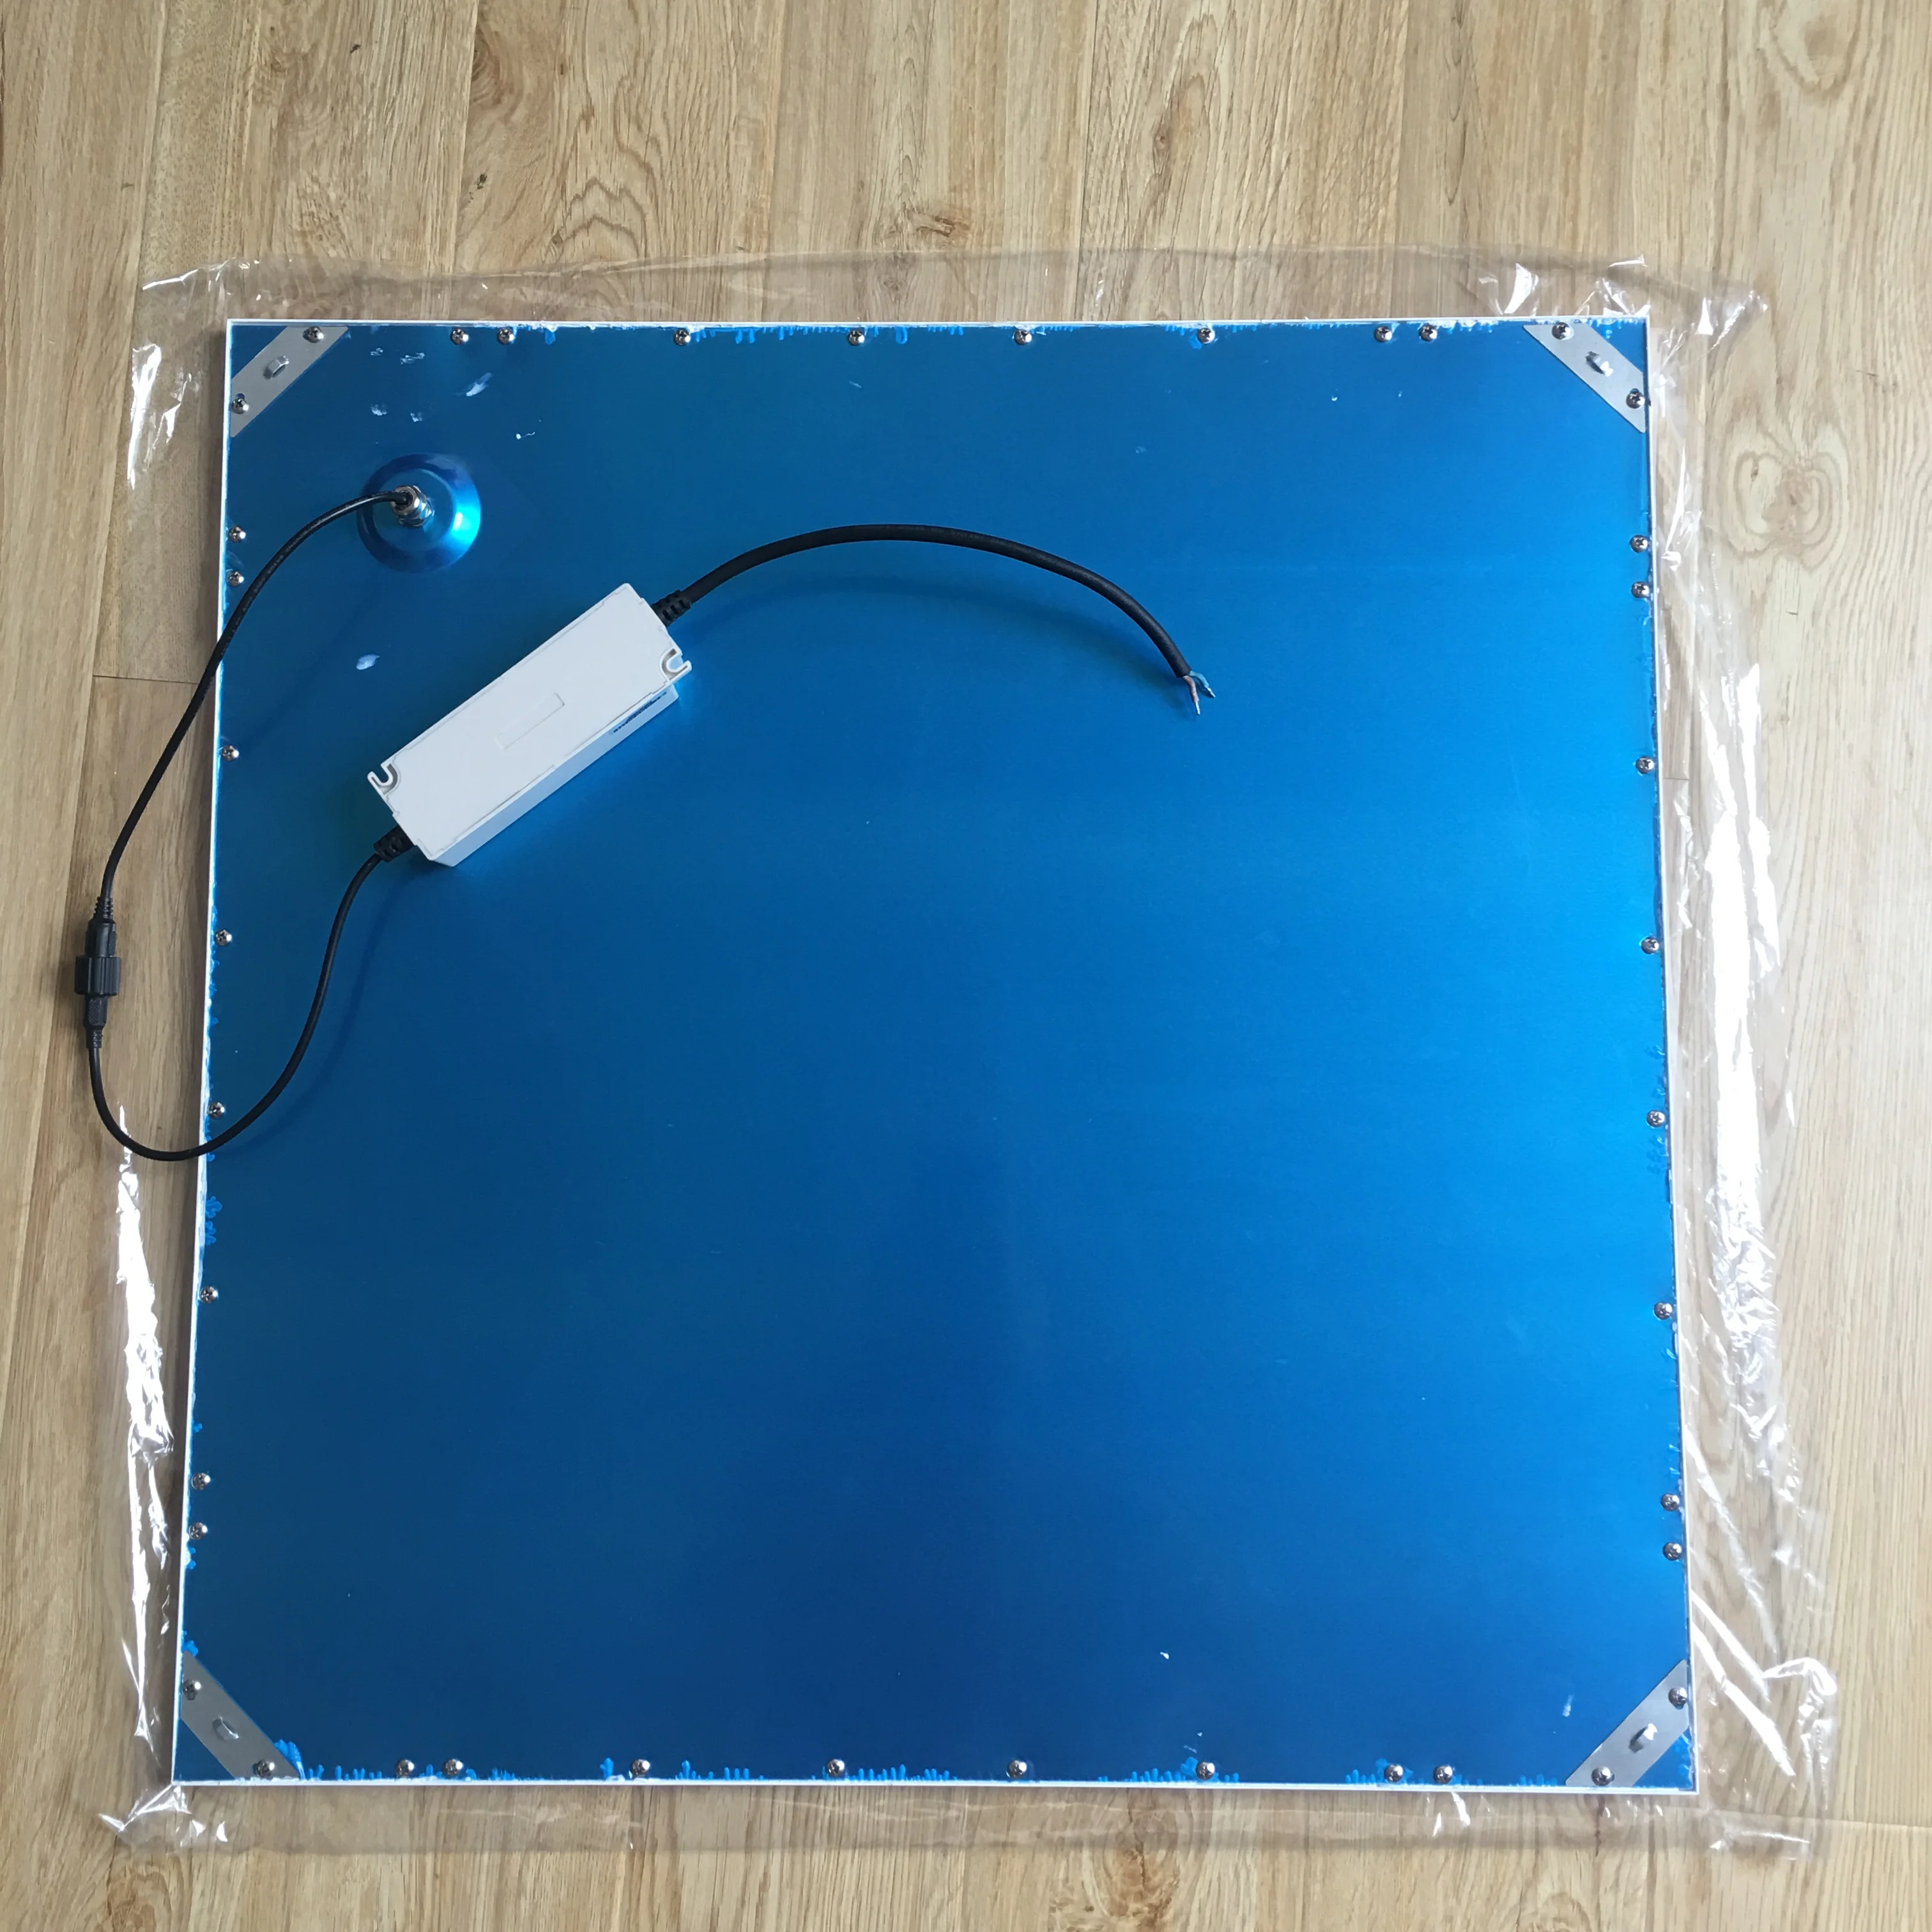 Waterproof IP65 LED panel light 40w 595*595mm panel with high quality and low price